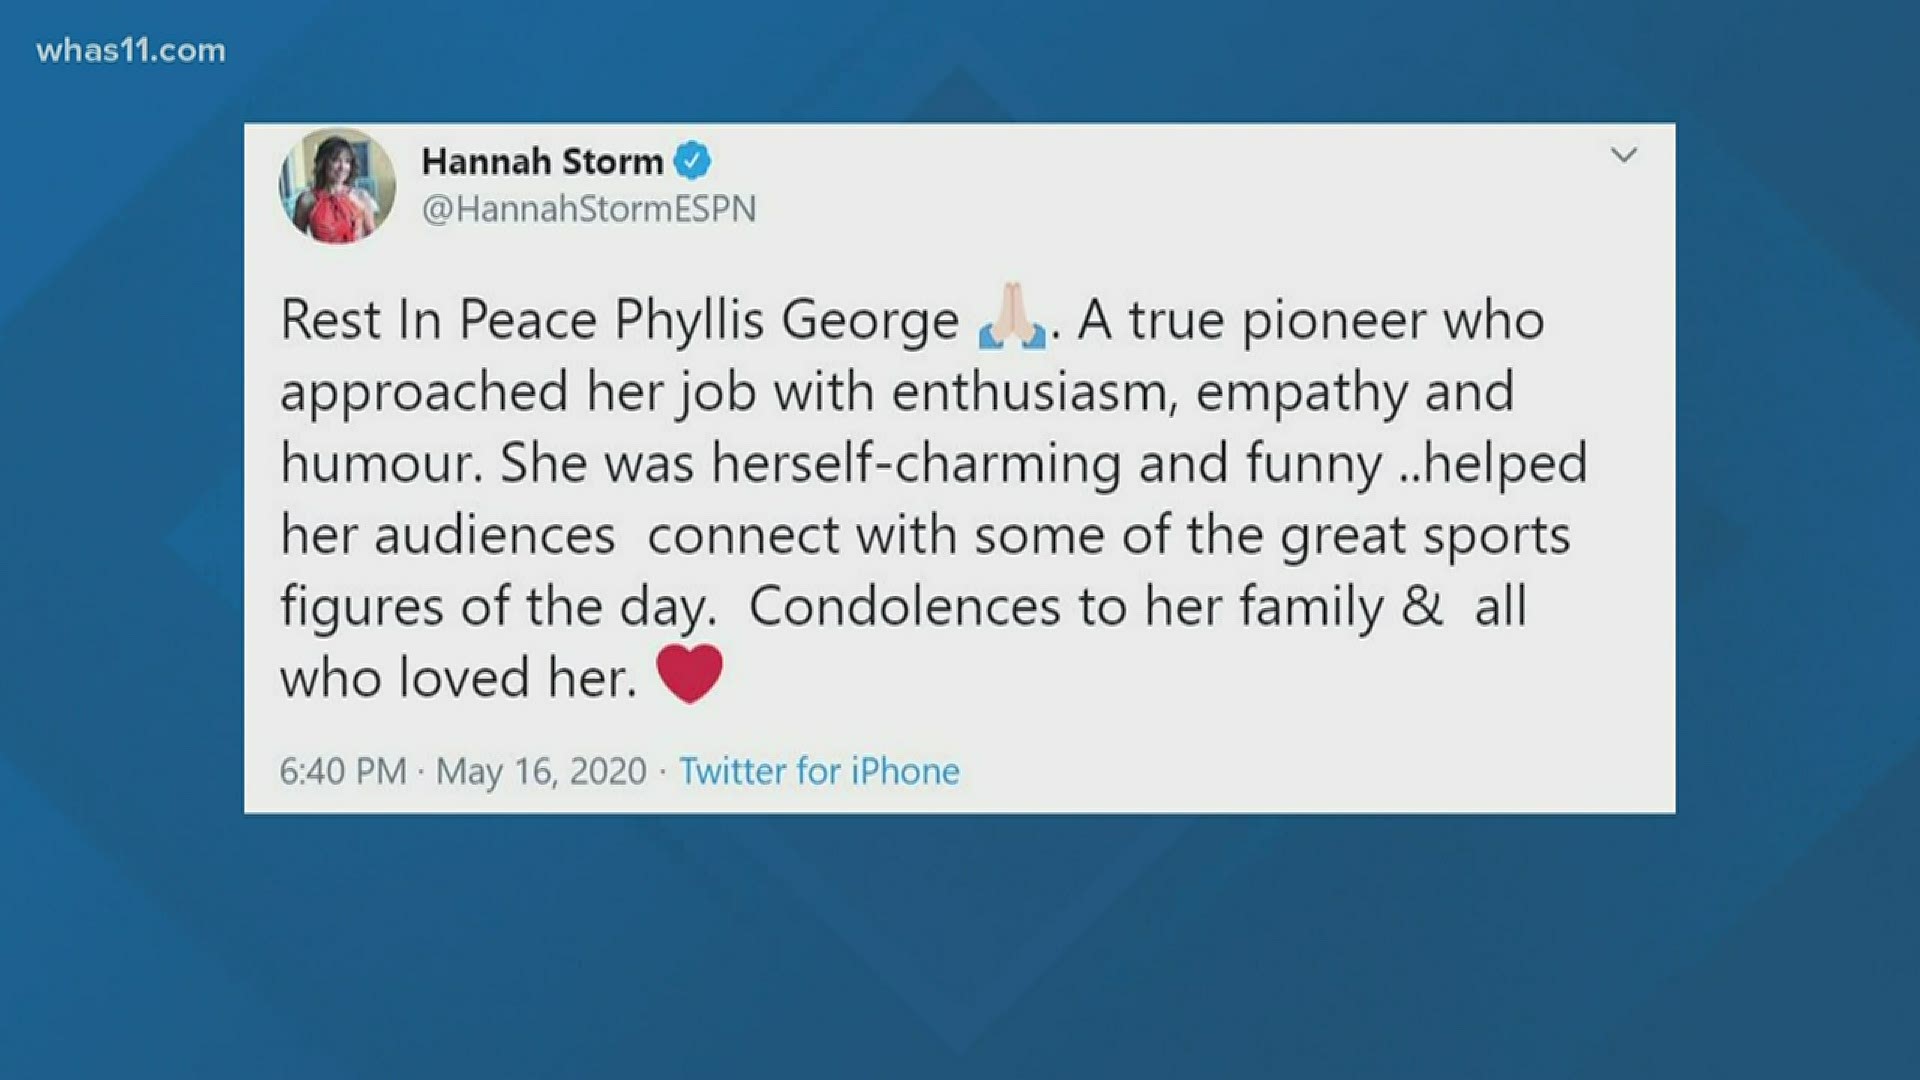 As the death of Phyllis George was announced, friends, colleagues and those who admired the former Miss America shared their thoughts via social media.